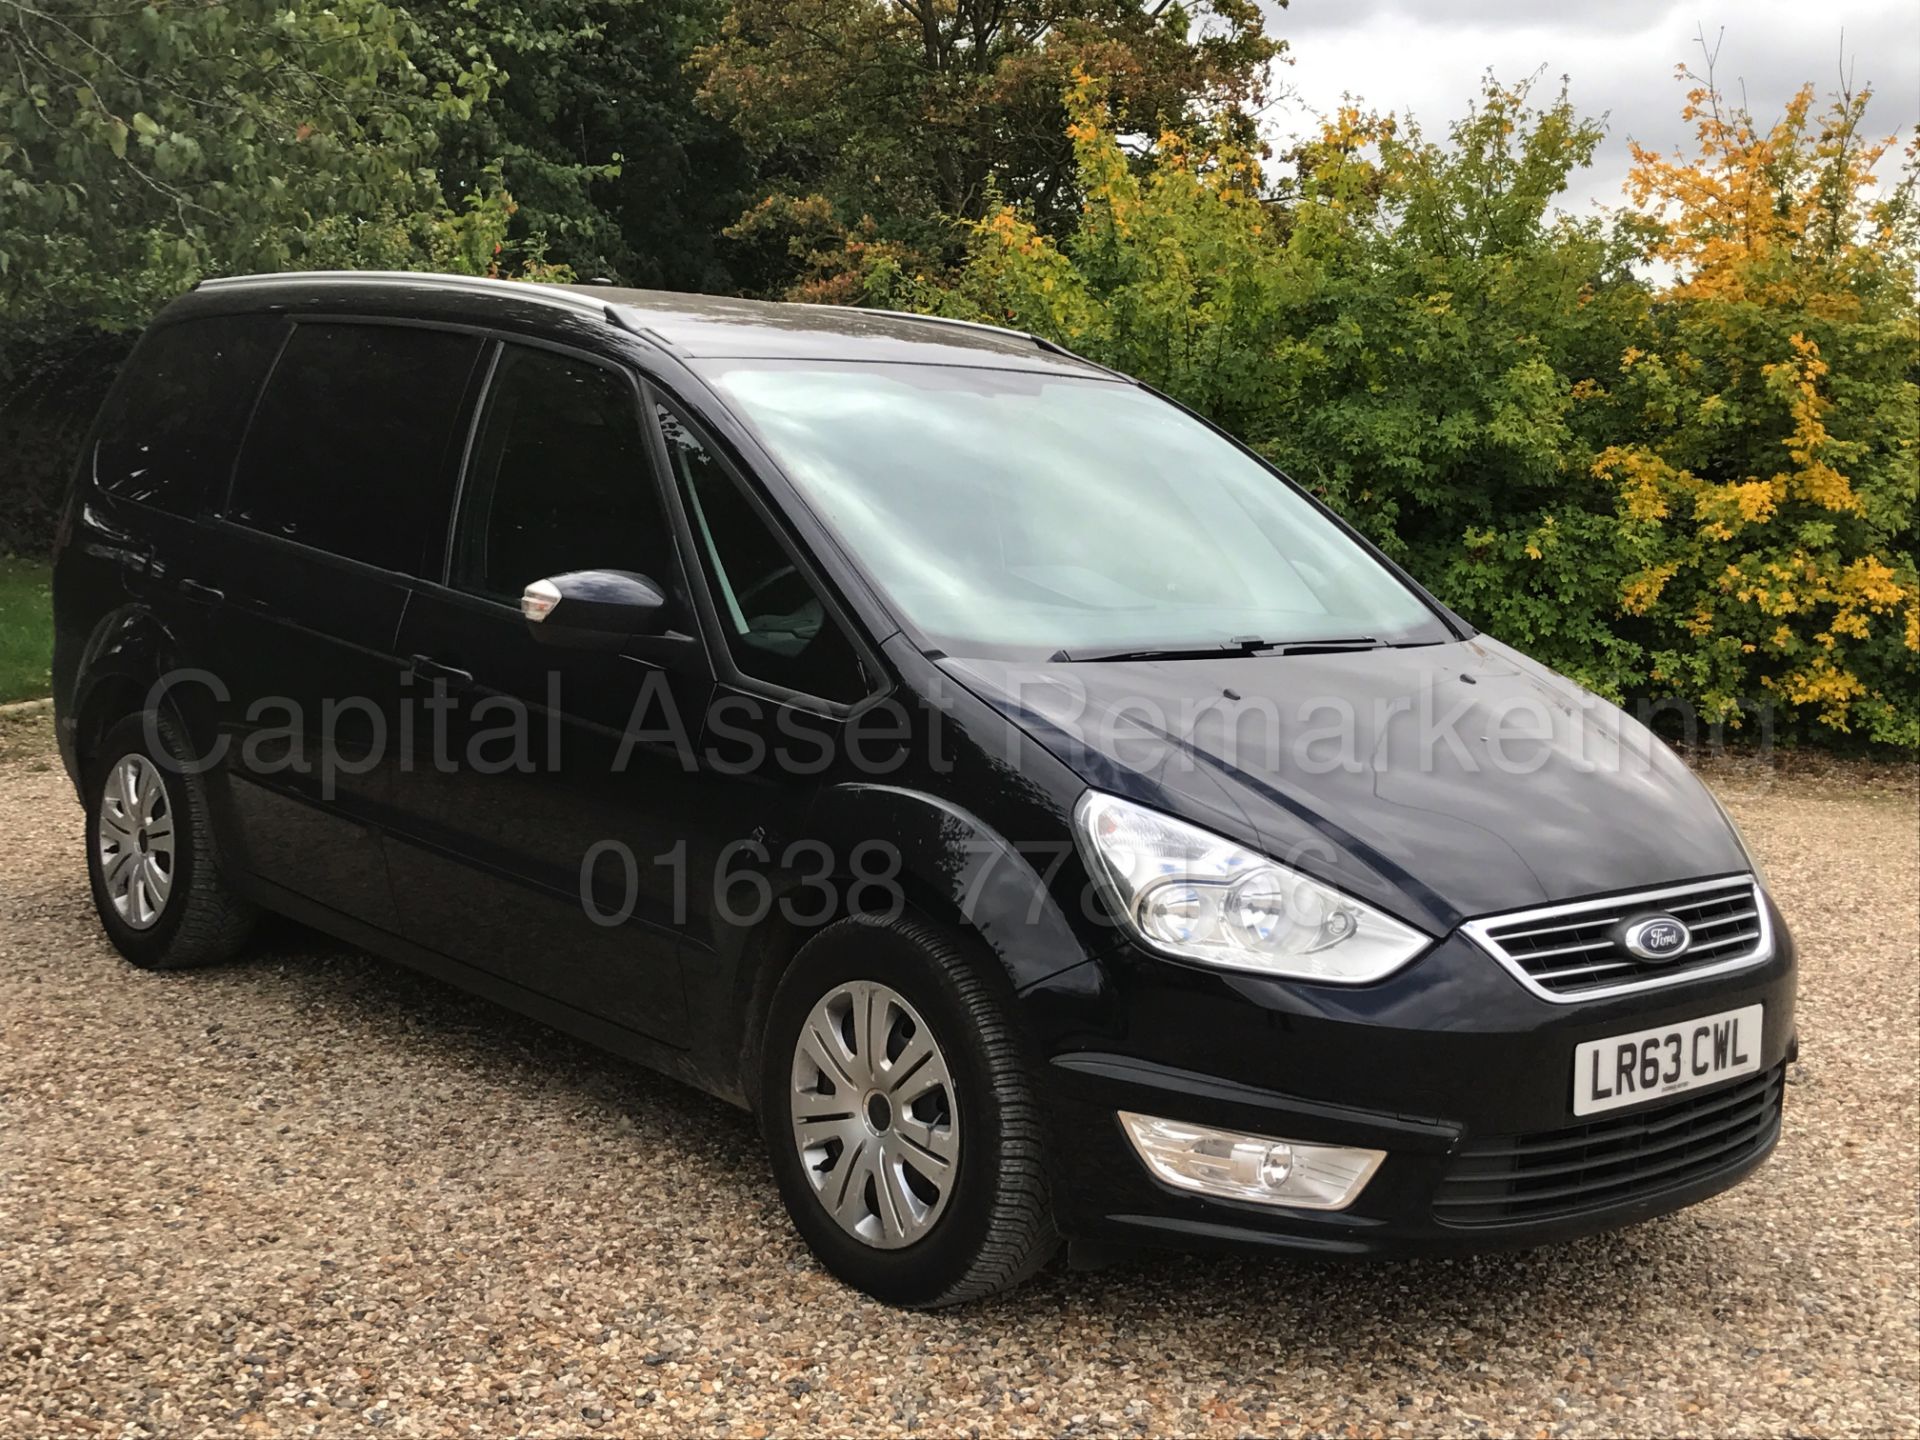 FORD GALAXY 'ZETEC' 7 SEATER MPV (2014 MODEL) '2.0 TDCI - 140 BHP - POWER SHIFT' (1 OWNER FROM NEW) - Image 2 of 27